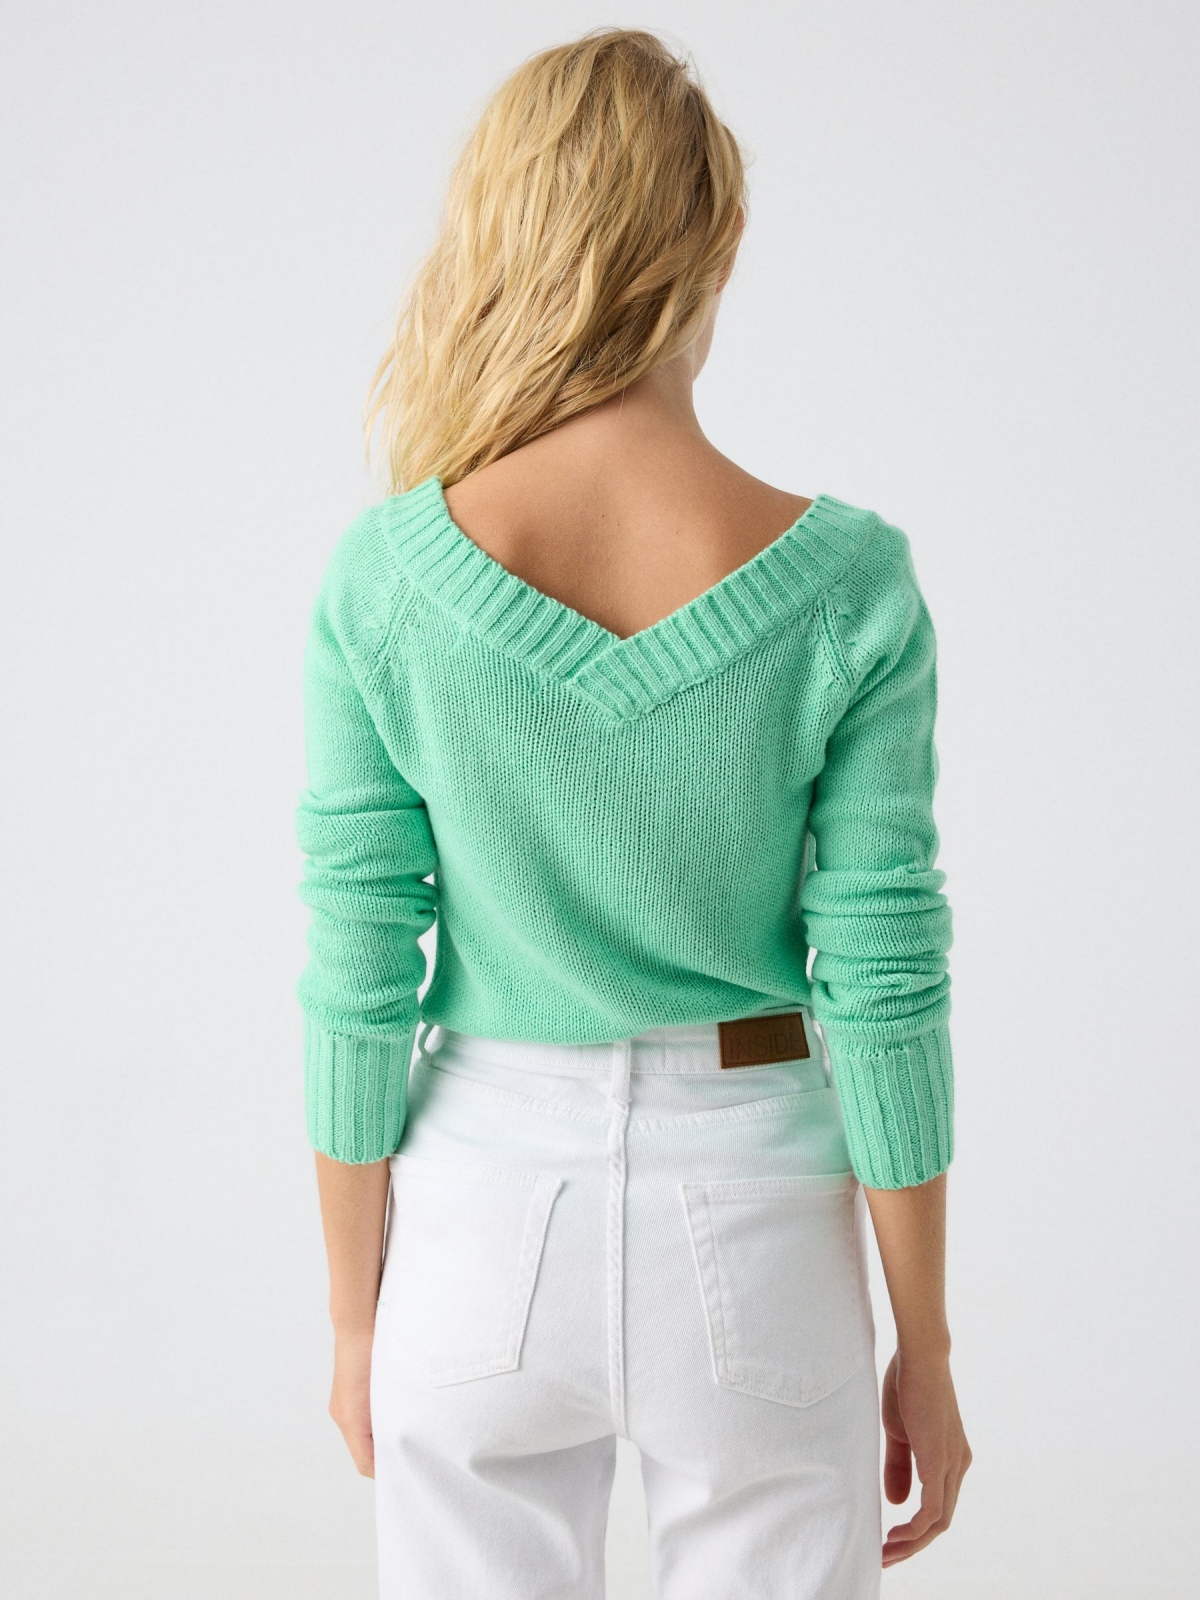 V-neck knit sweater green middle back view